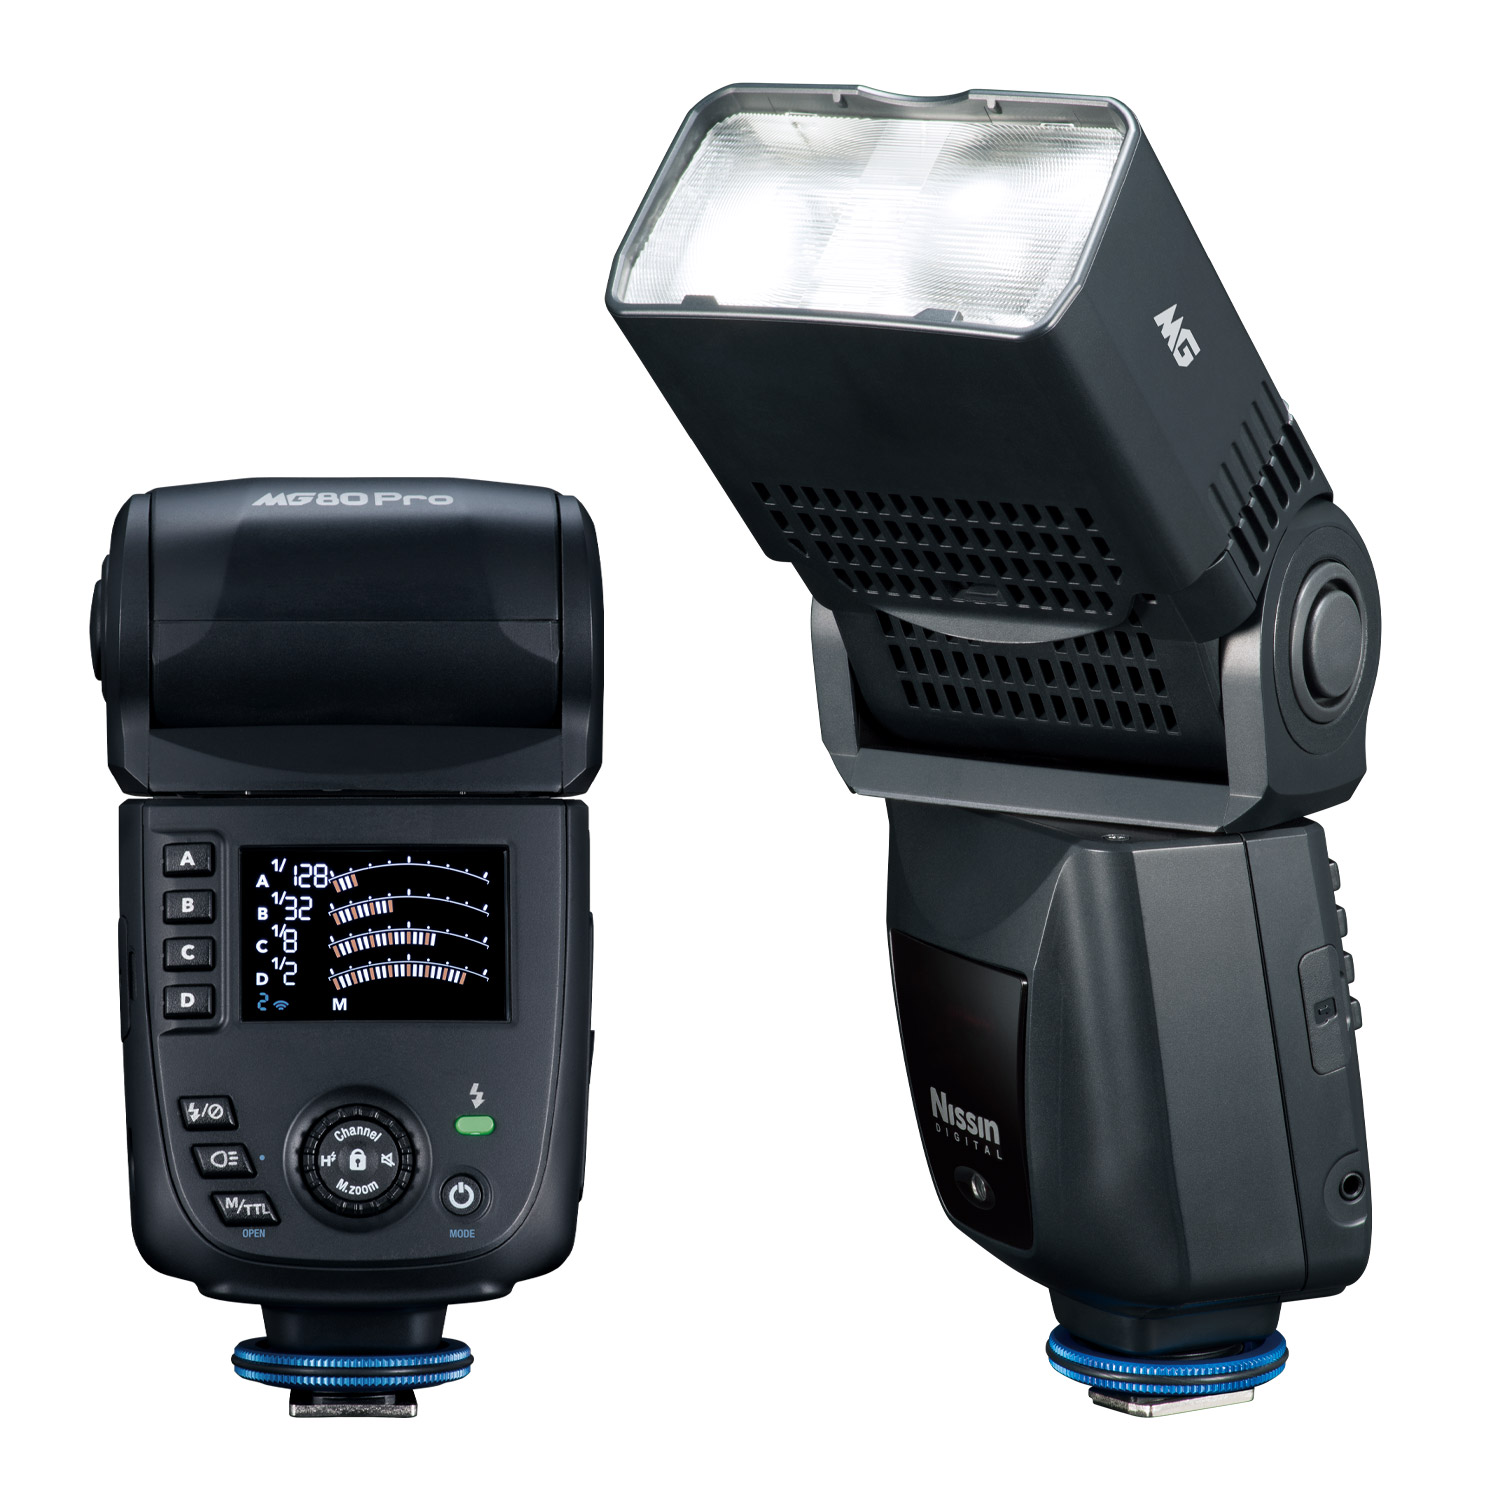 Nissin MG80 Pro flash for wedding, event, and location photographers.